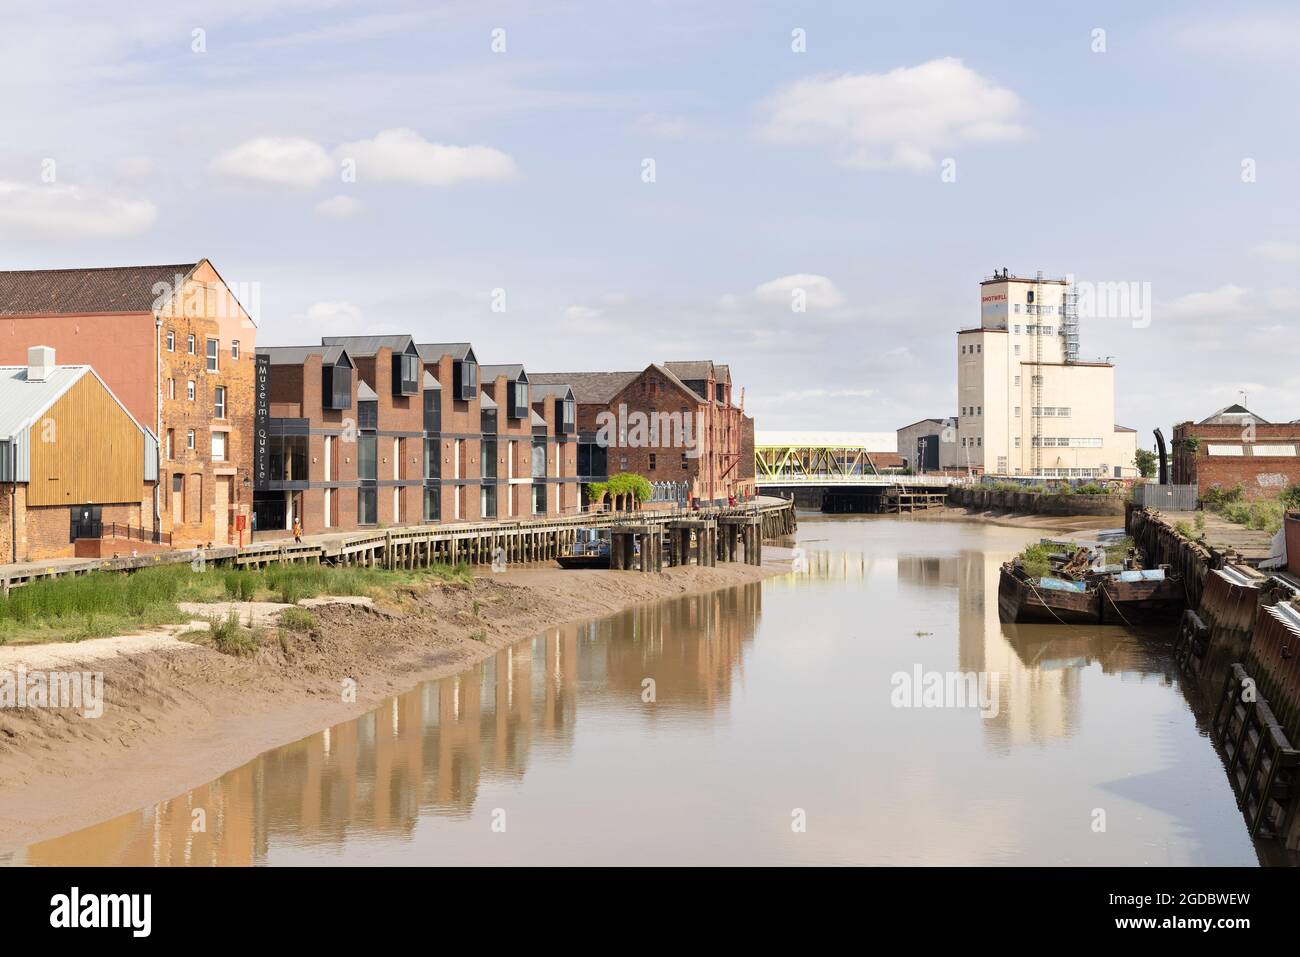 River Hull - The River Hull and Warehouses, Kingston upon Hull, East Yorkshire Großbritannien Stockfoto